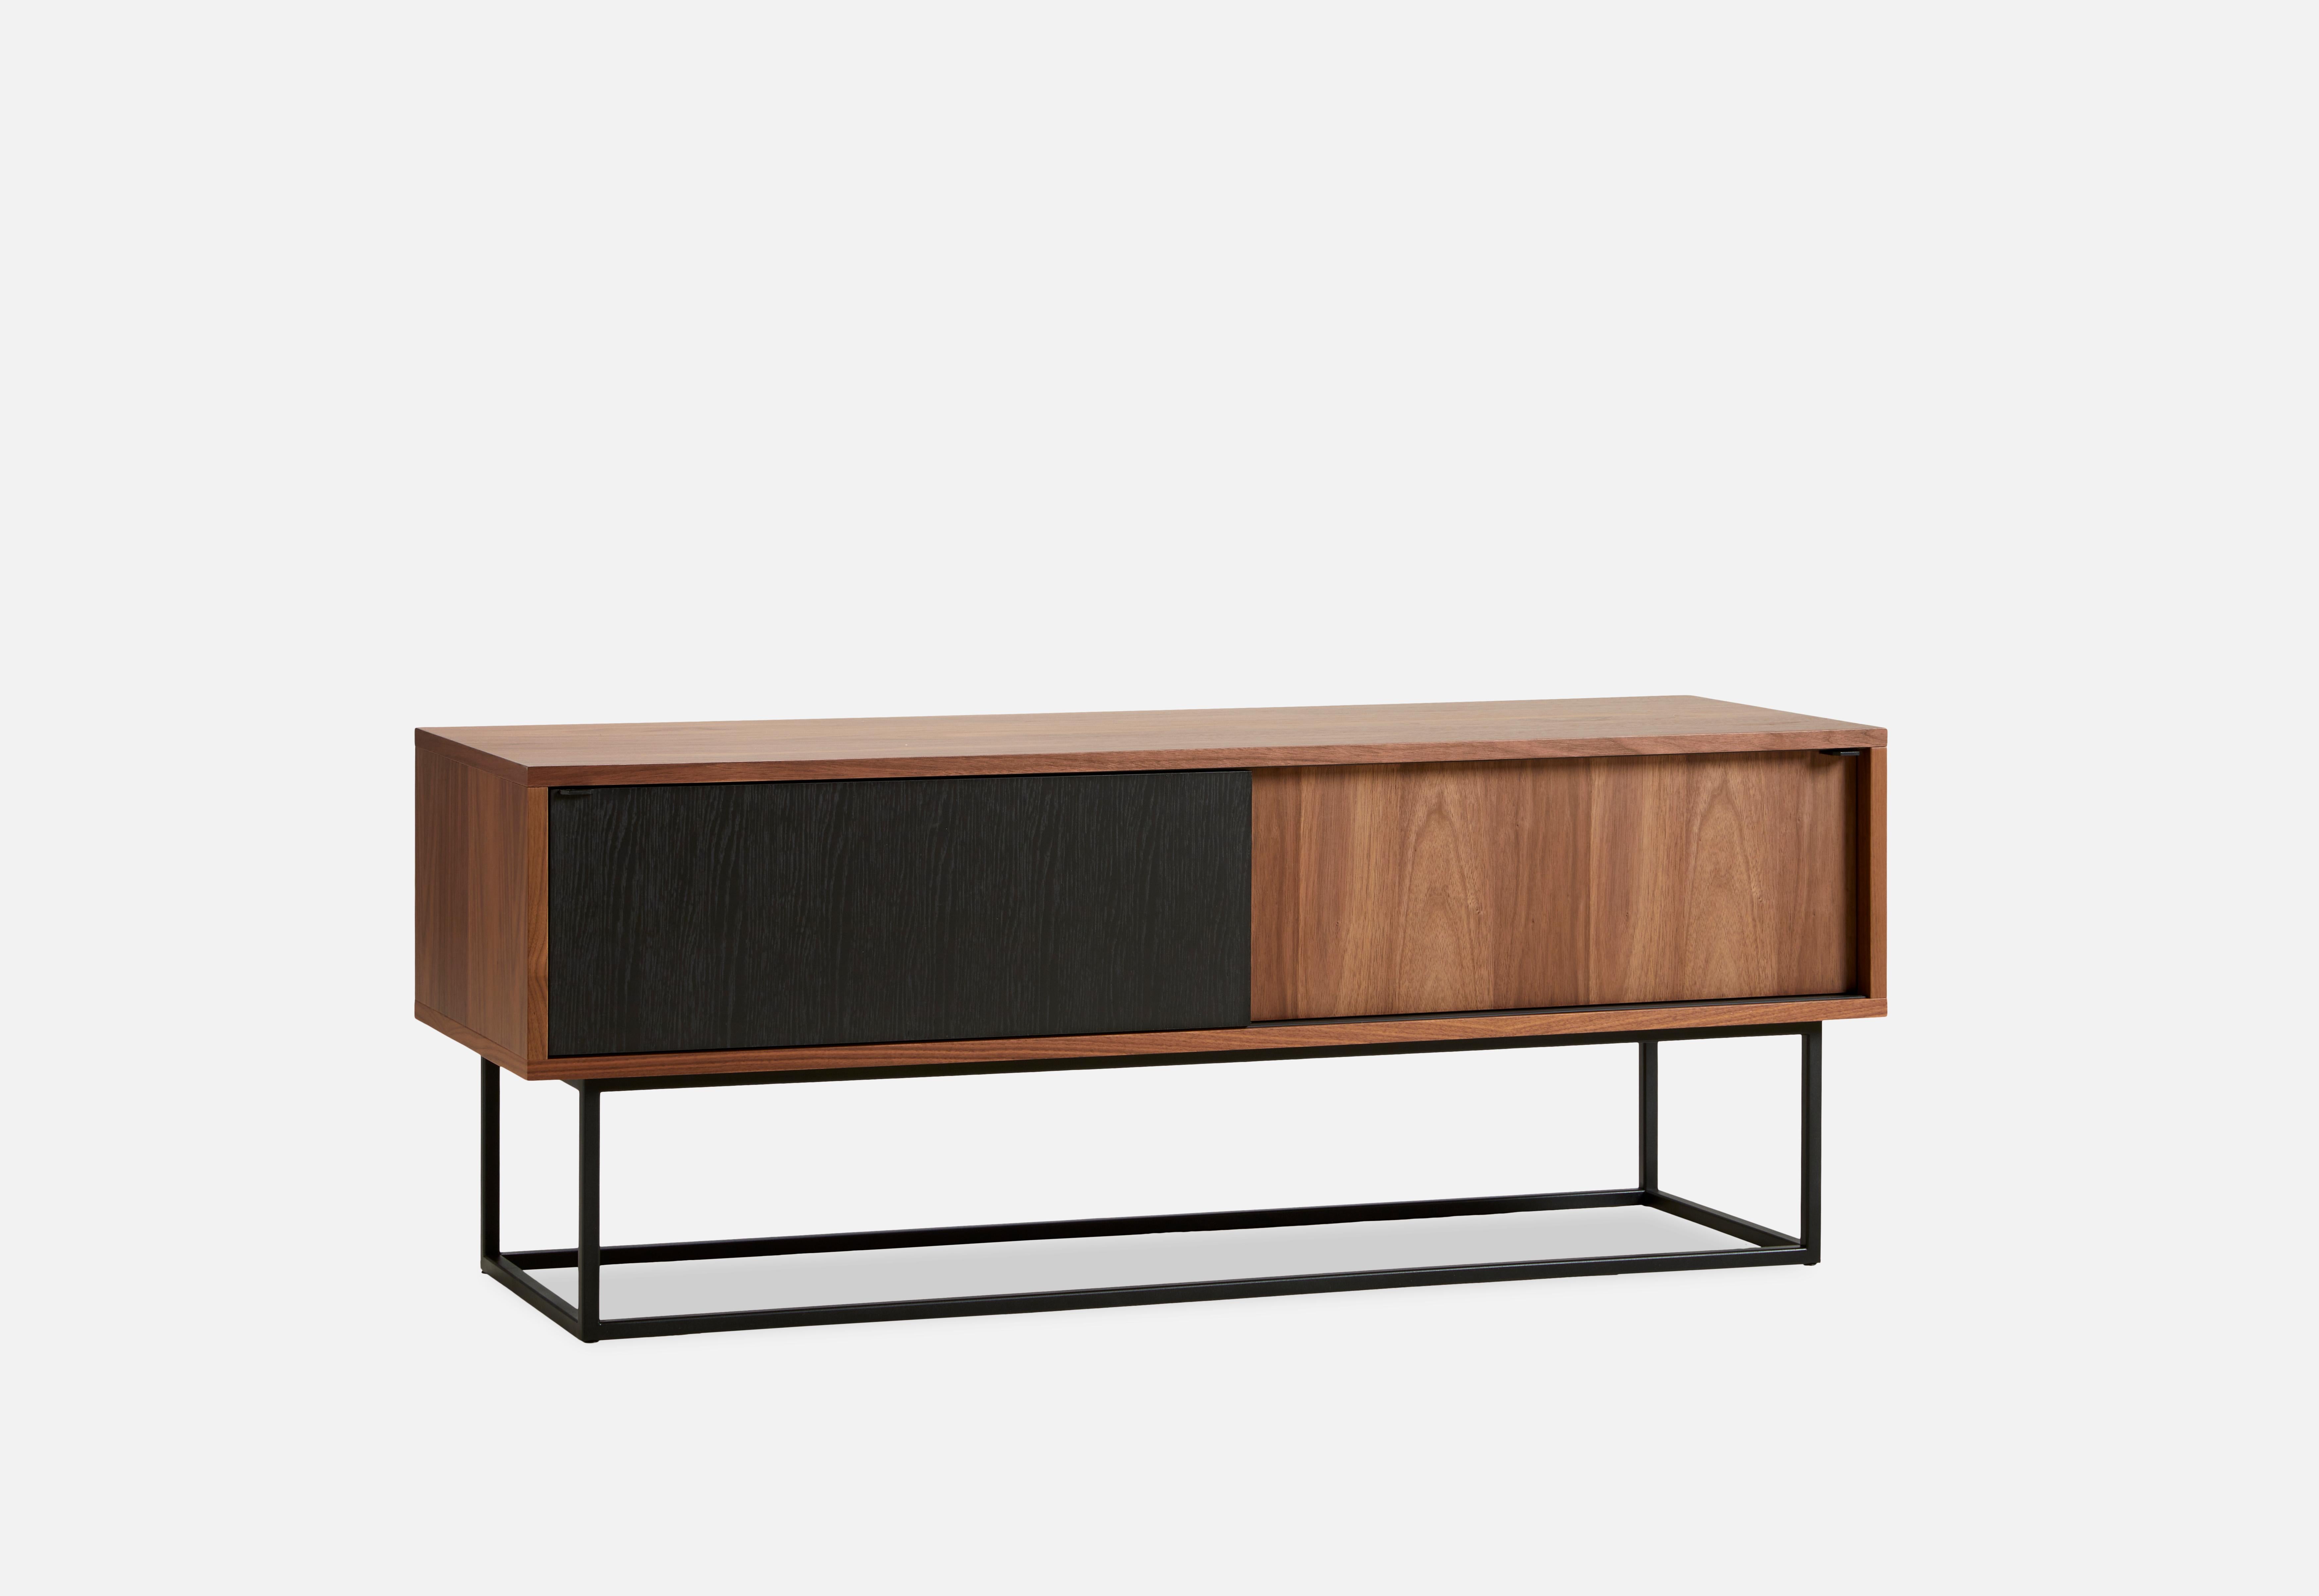 Walnut virka low sideboard by Ropke design and Moaak.
Materials: walnut, metal.
Dimensions: D 40 x W 120 x H 47 cm.
Also available in different colours and materials.

The founders, Mia and Torben Koed, decided to put their 30 years of